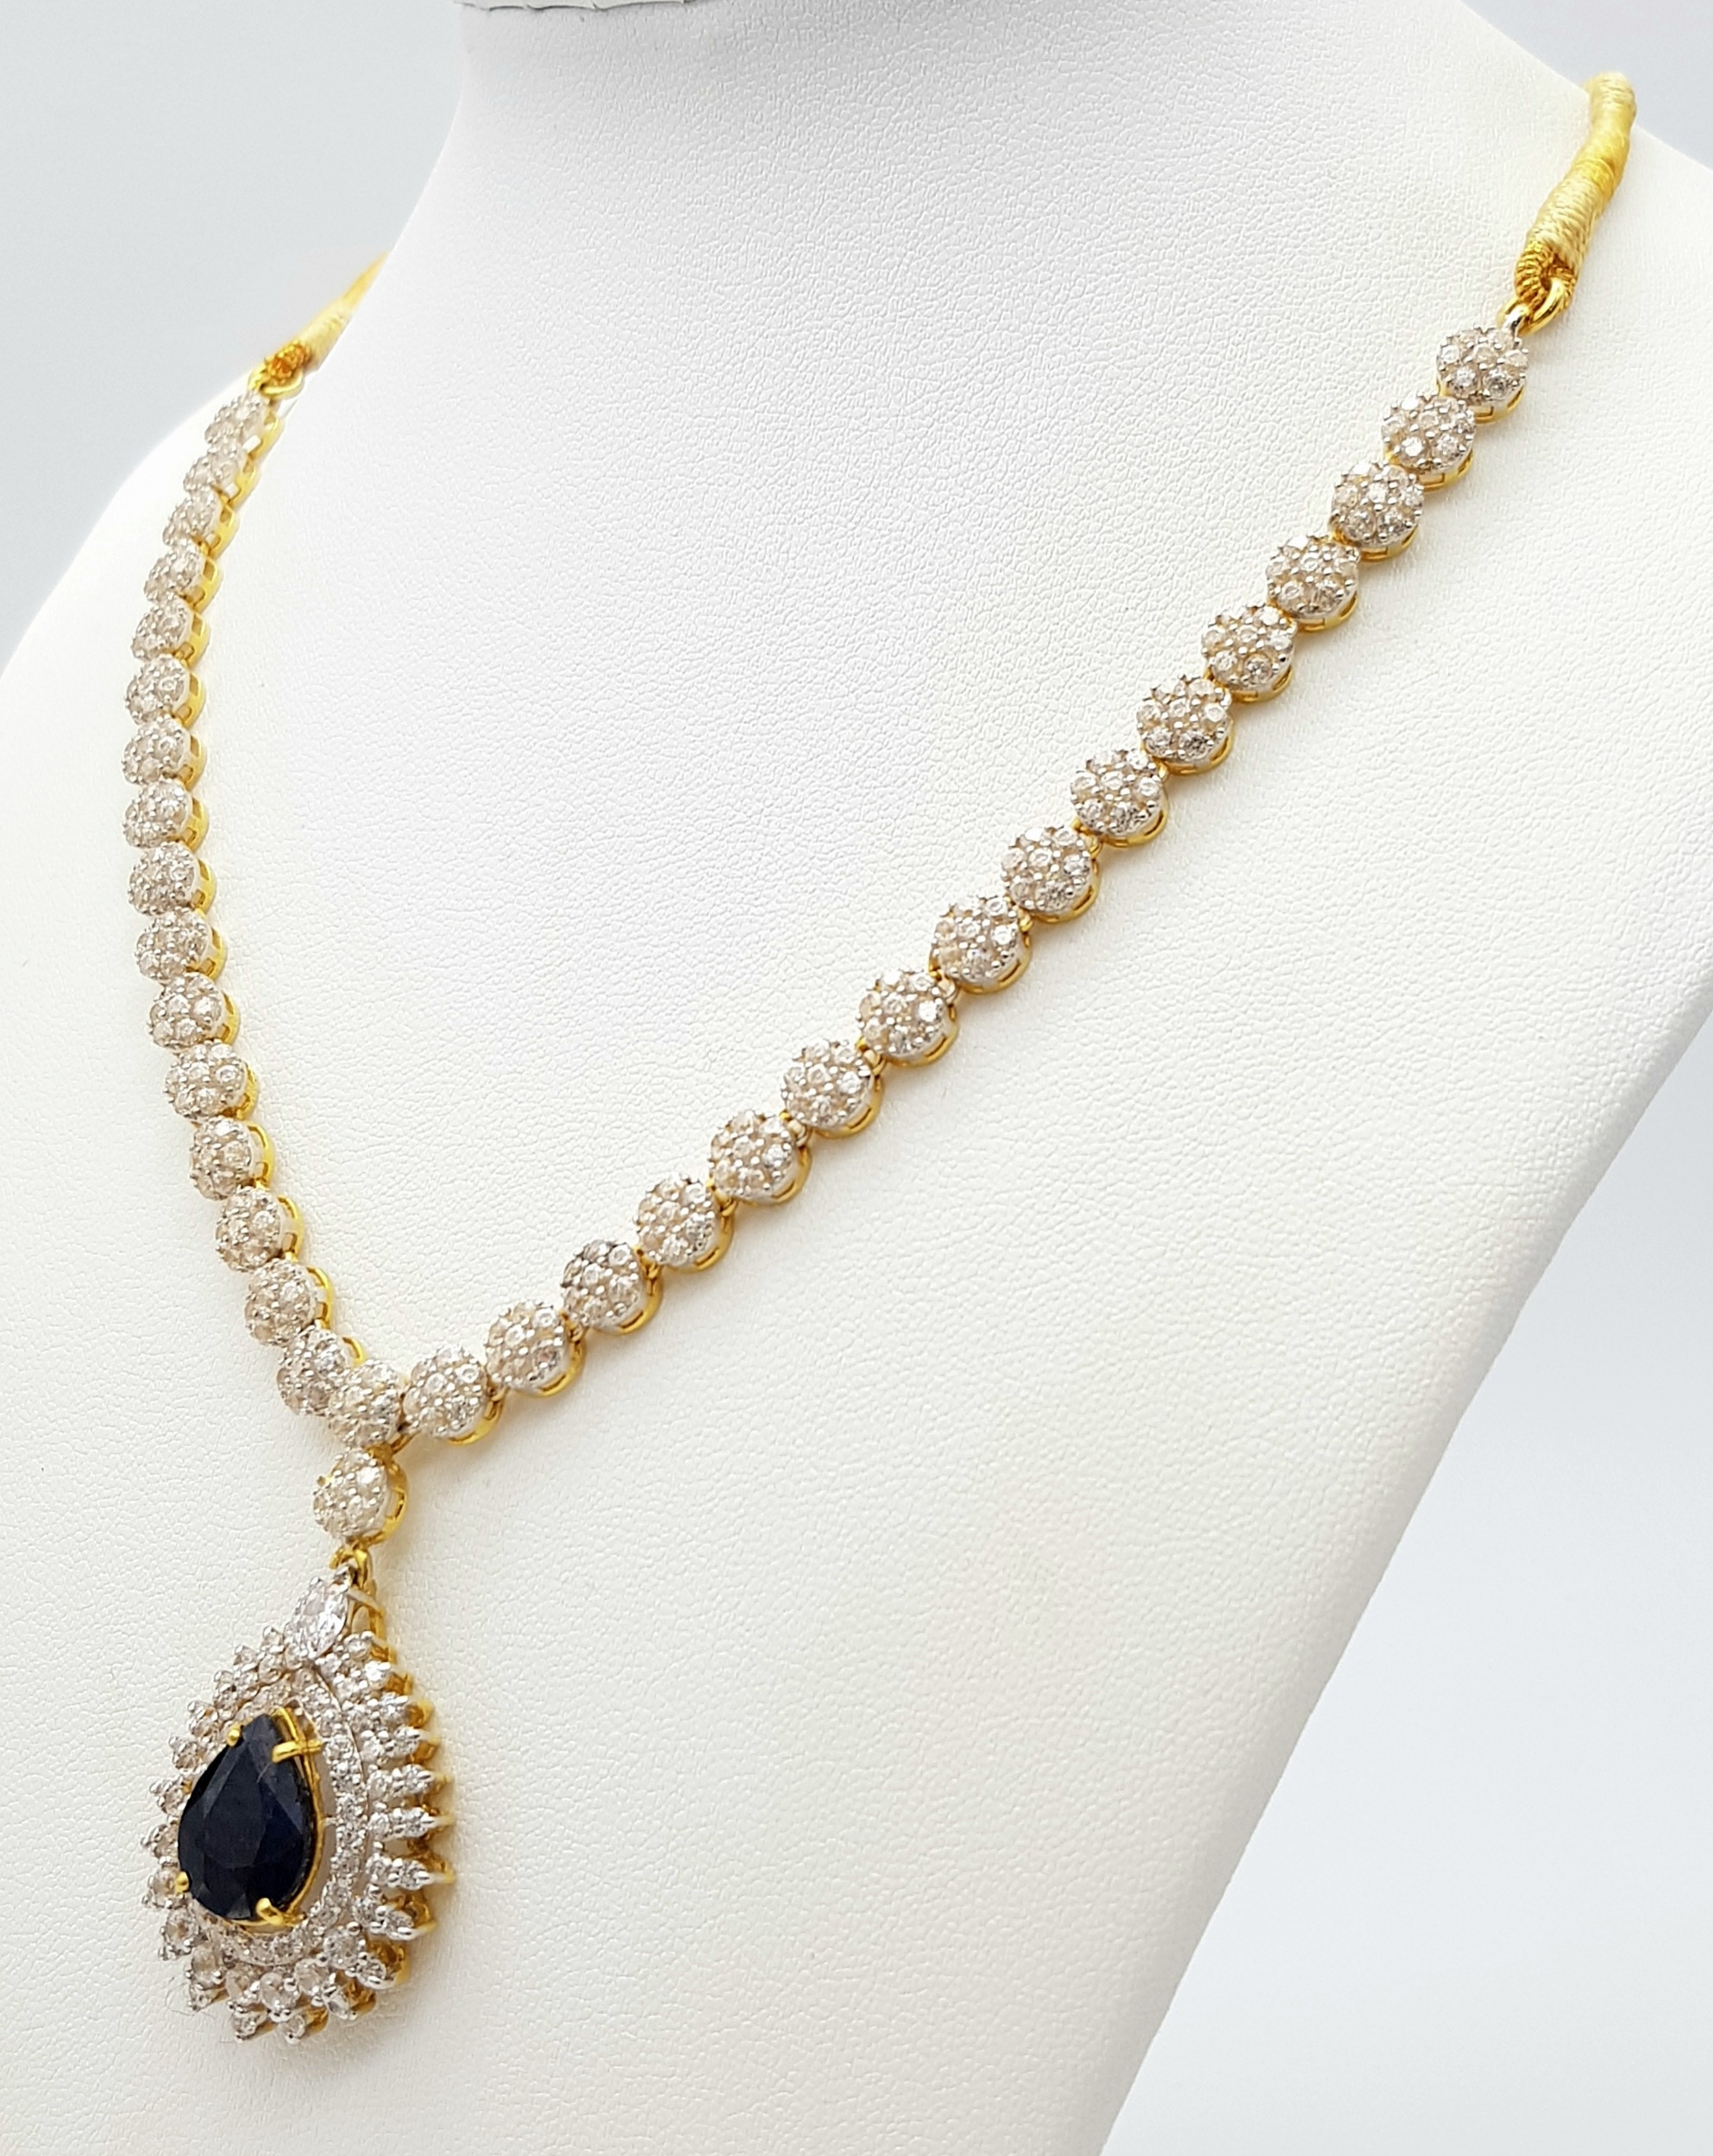 A Fabulous Jewellery Lot! A 21K Rich Yellow Gold Diamond and White Stone (one missing) Necklace with - Image 4 of 8